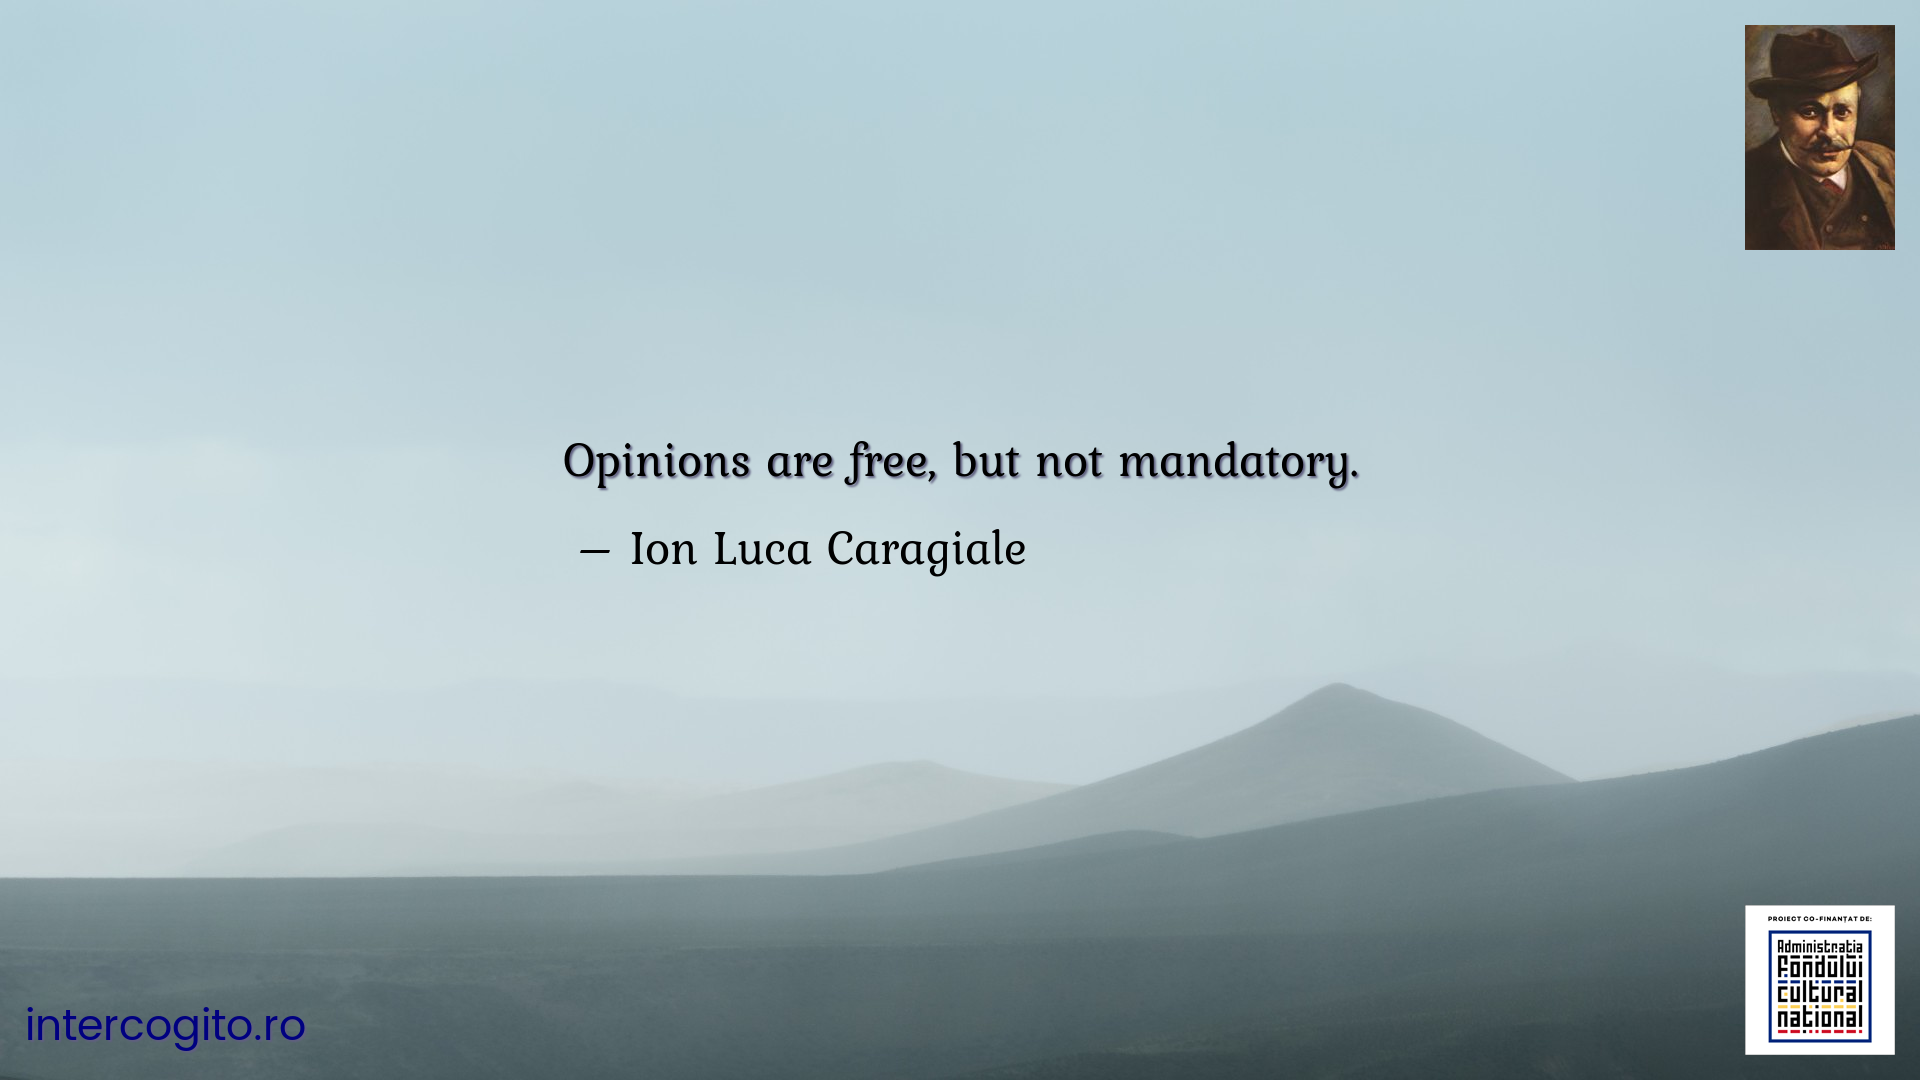 Opinions are free, but not mandatory.